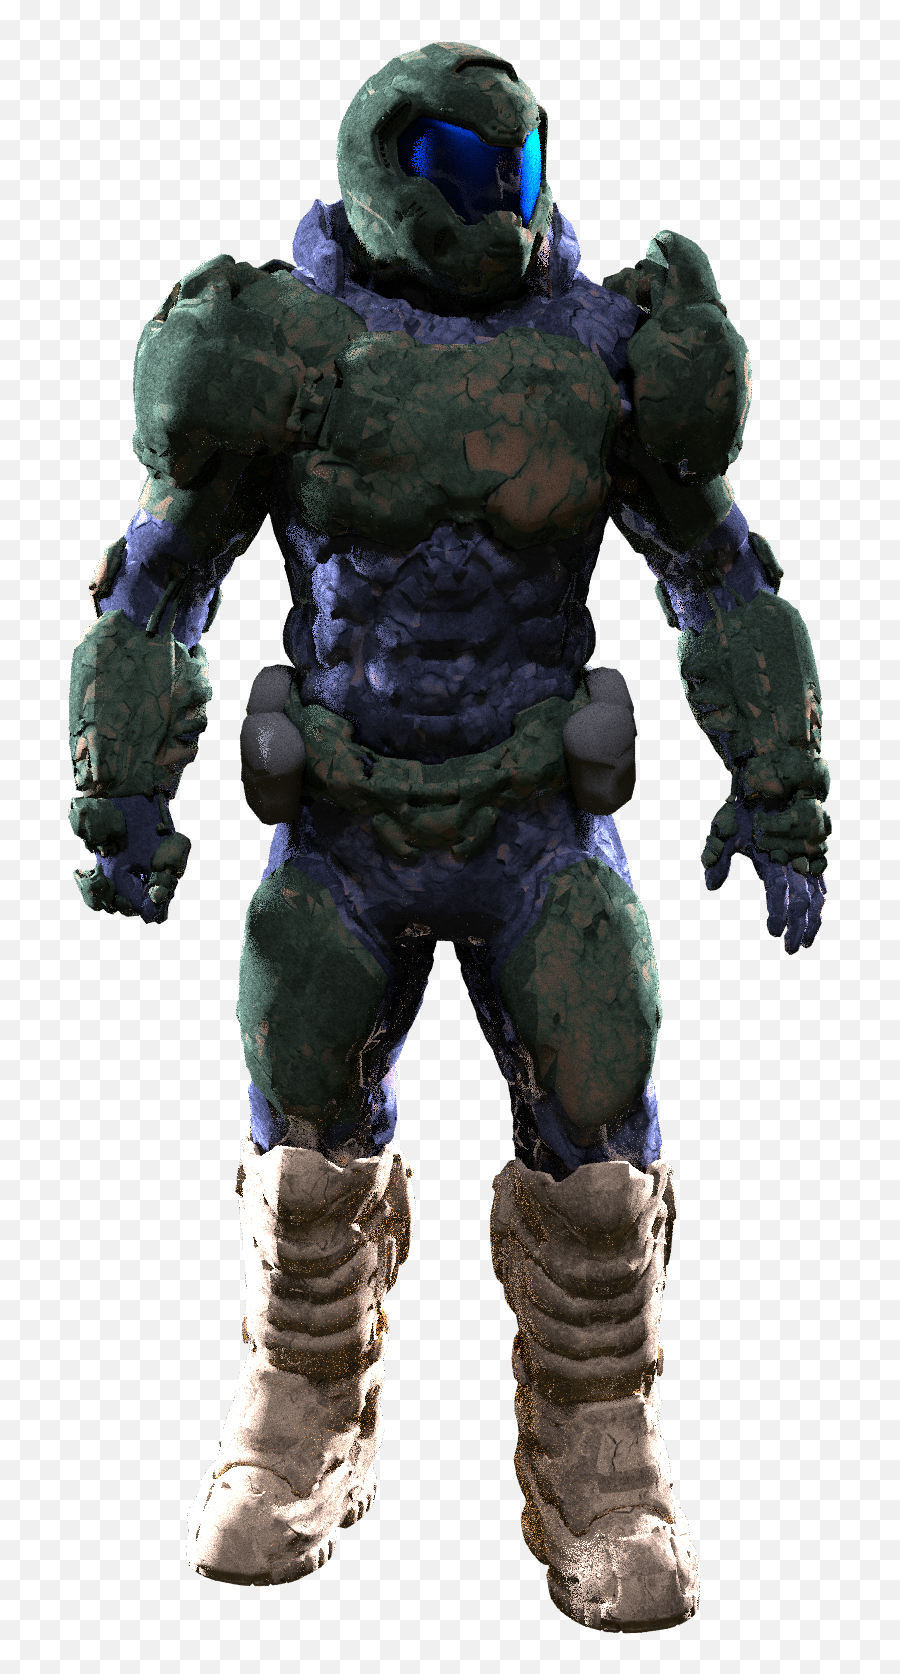 Doom Slayer 20 Textures Missing Replaced With Rust - Doom Slayer Png Transparent,Rust Texture Png